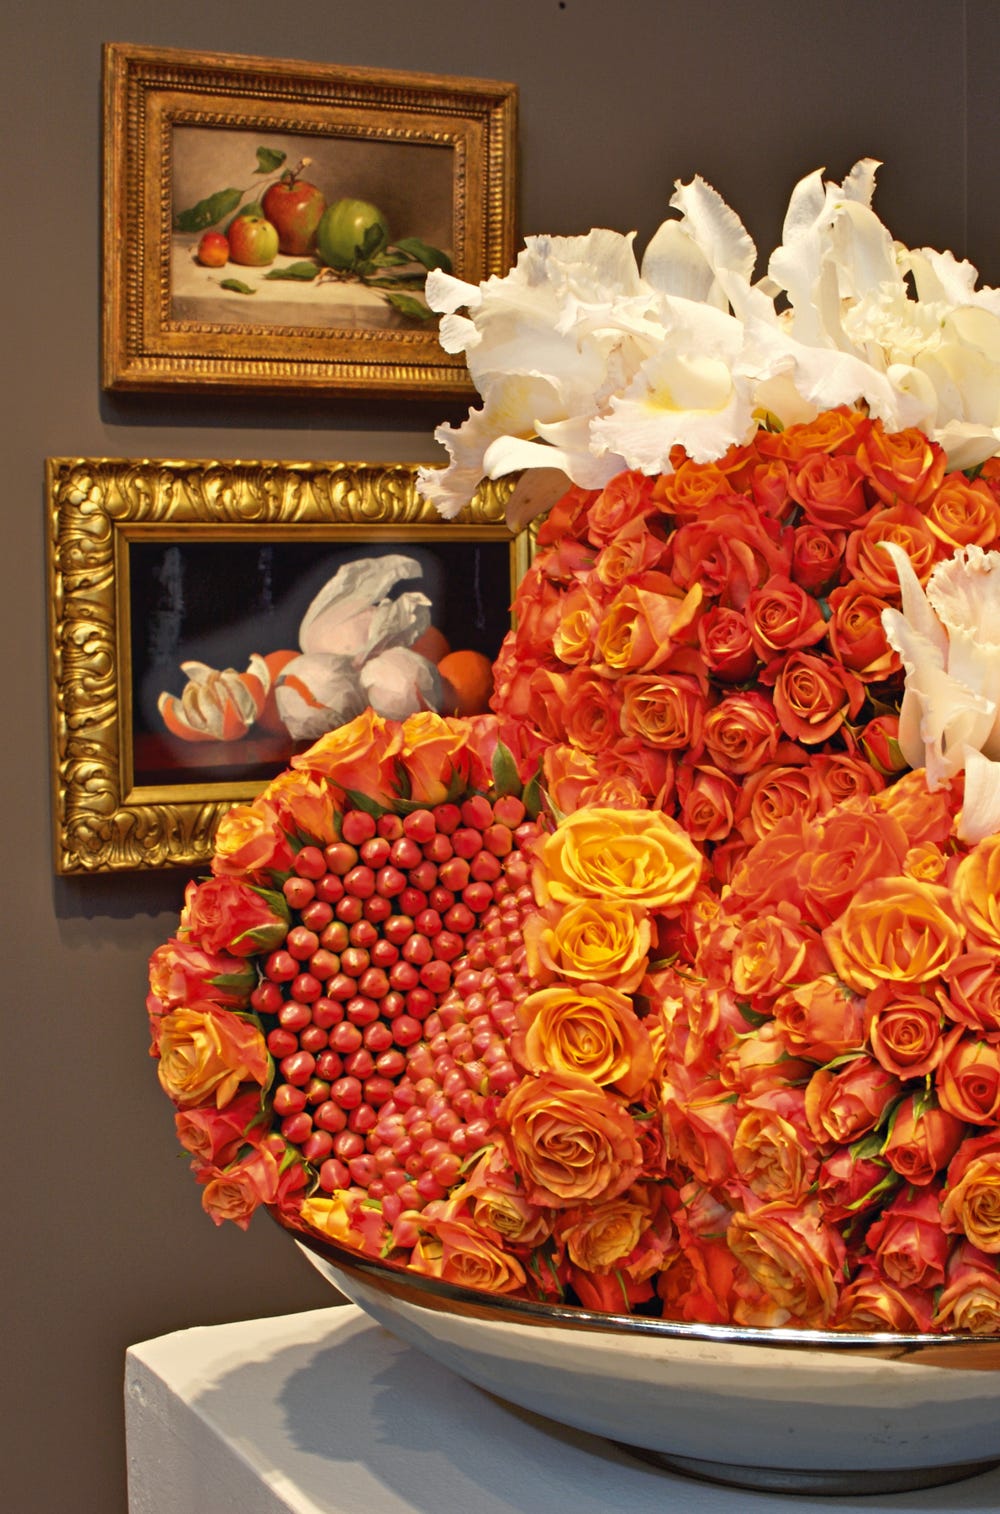 Photograph of red floral arrangement with corresponding painting in background.